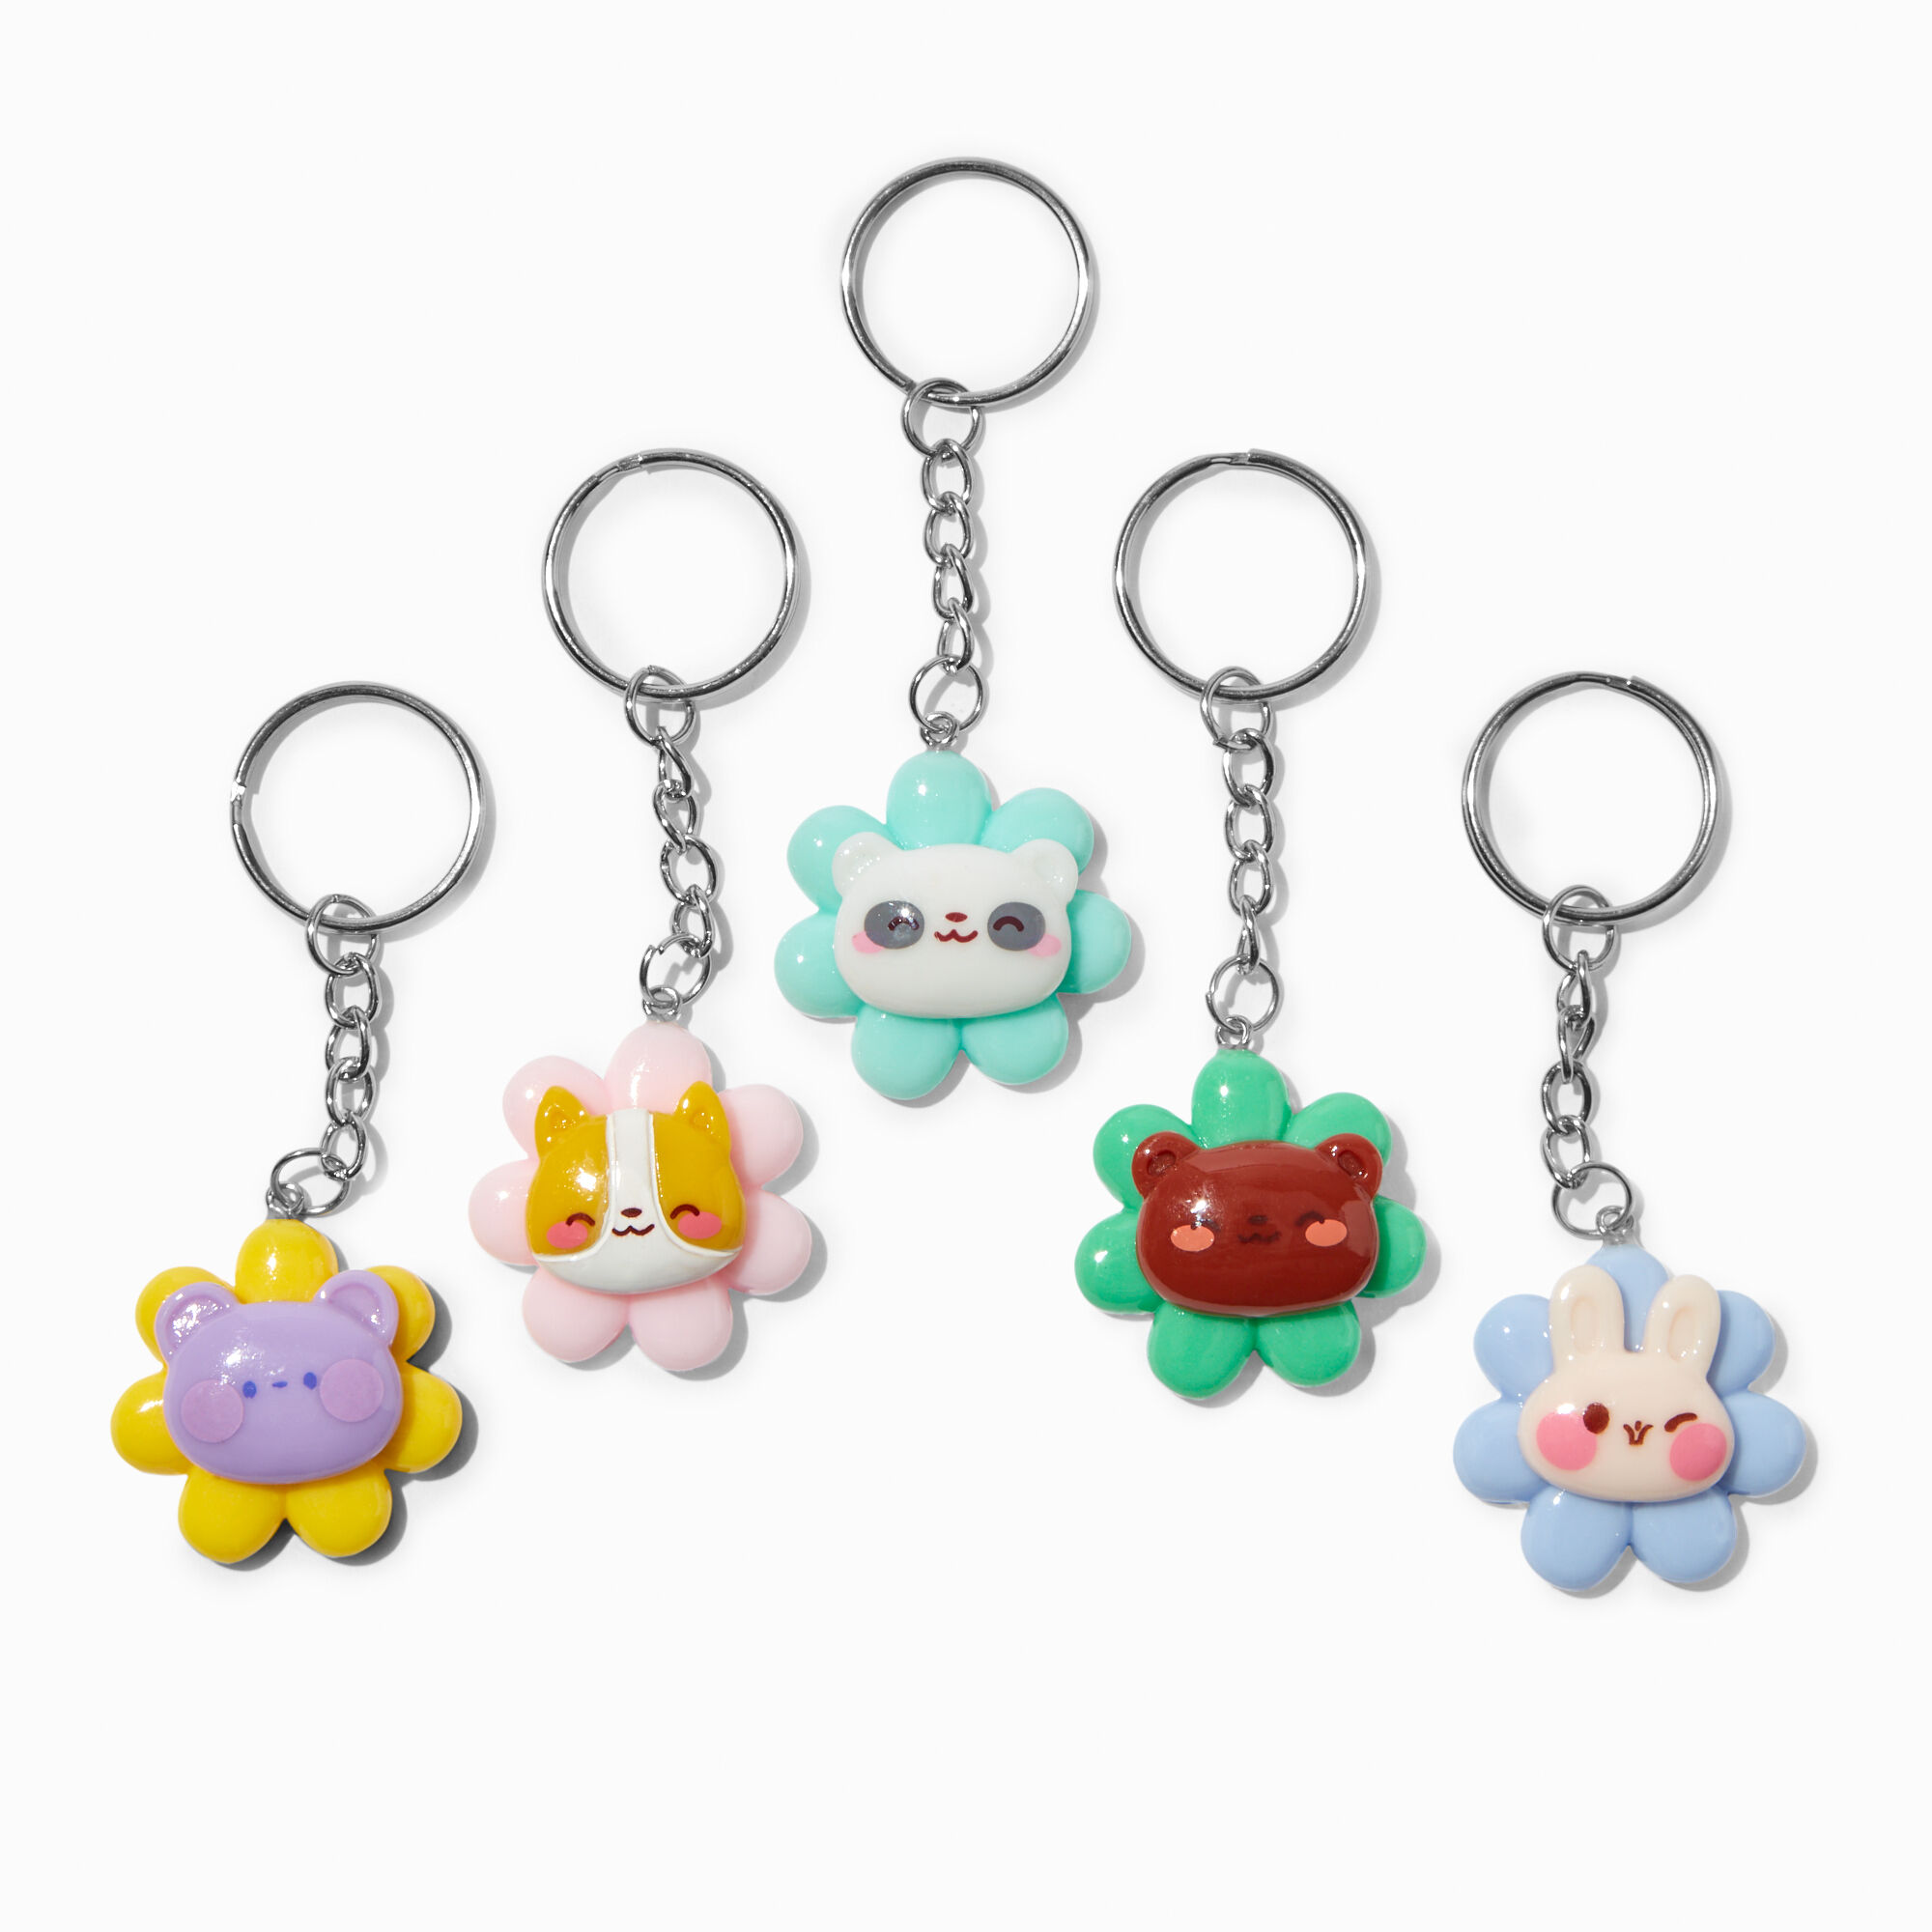 View Claires Critter Flower Best Friends Keyrings 5 Pack Silver information